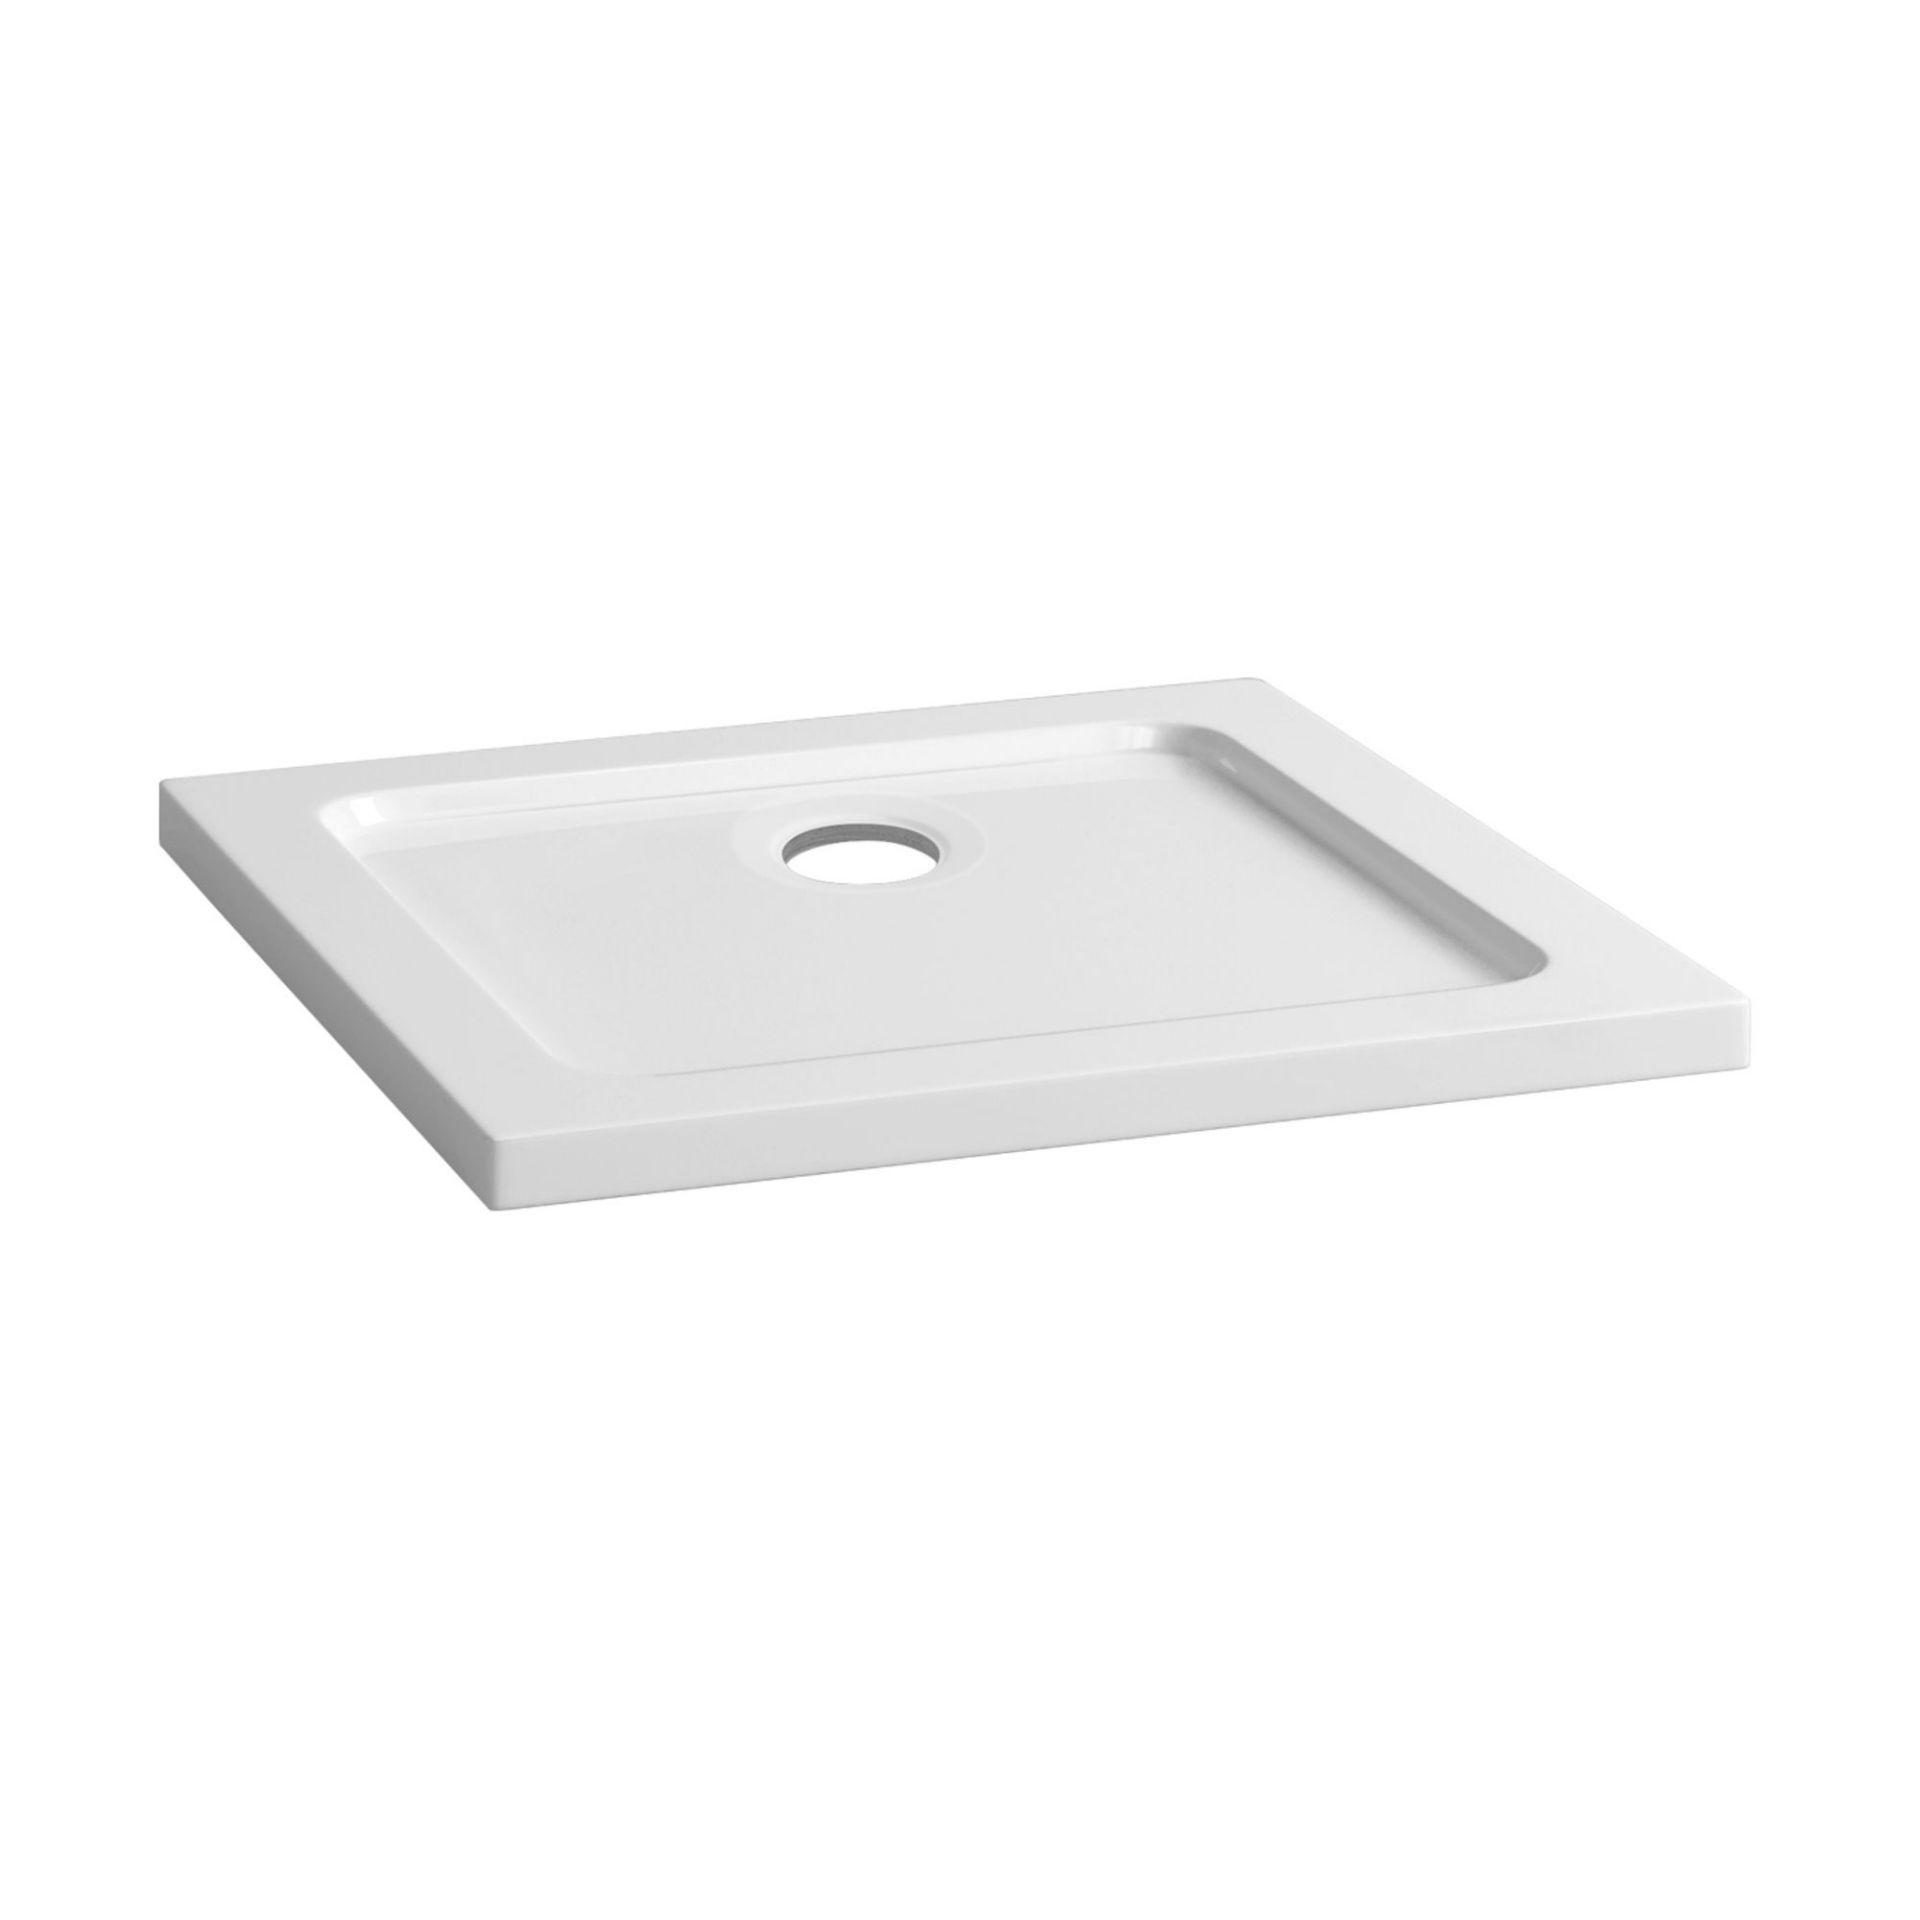 (ZL20) 700x700mm Square Ultra Slim Stone Shower Tray. Low profile ultra slim design Gel coated stone - Image 2 of 2